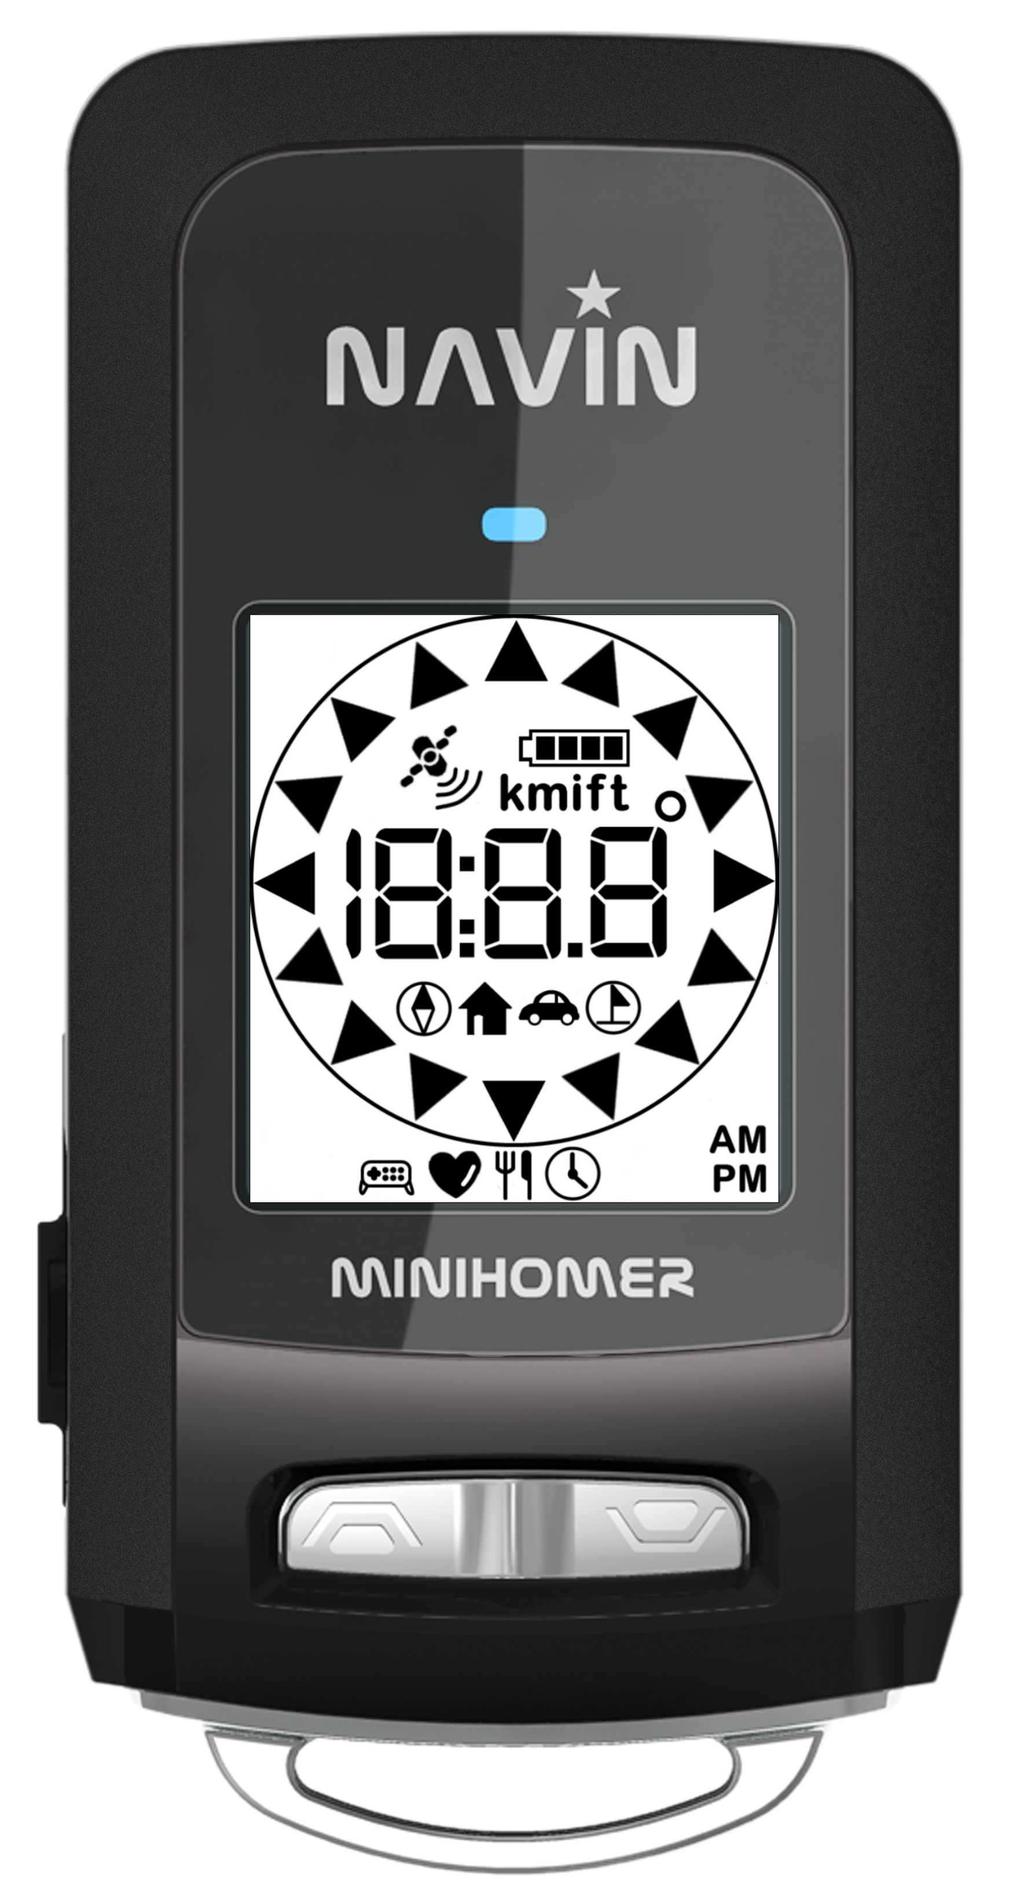 NAVIN minihomer is the world s easiest to use personal GPS navigation device that helps you find your way back to previously marked locations.